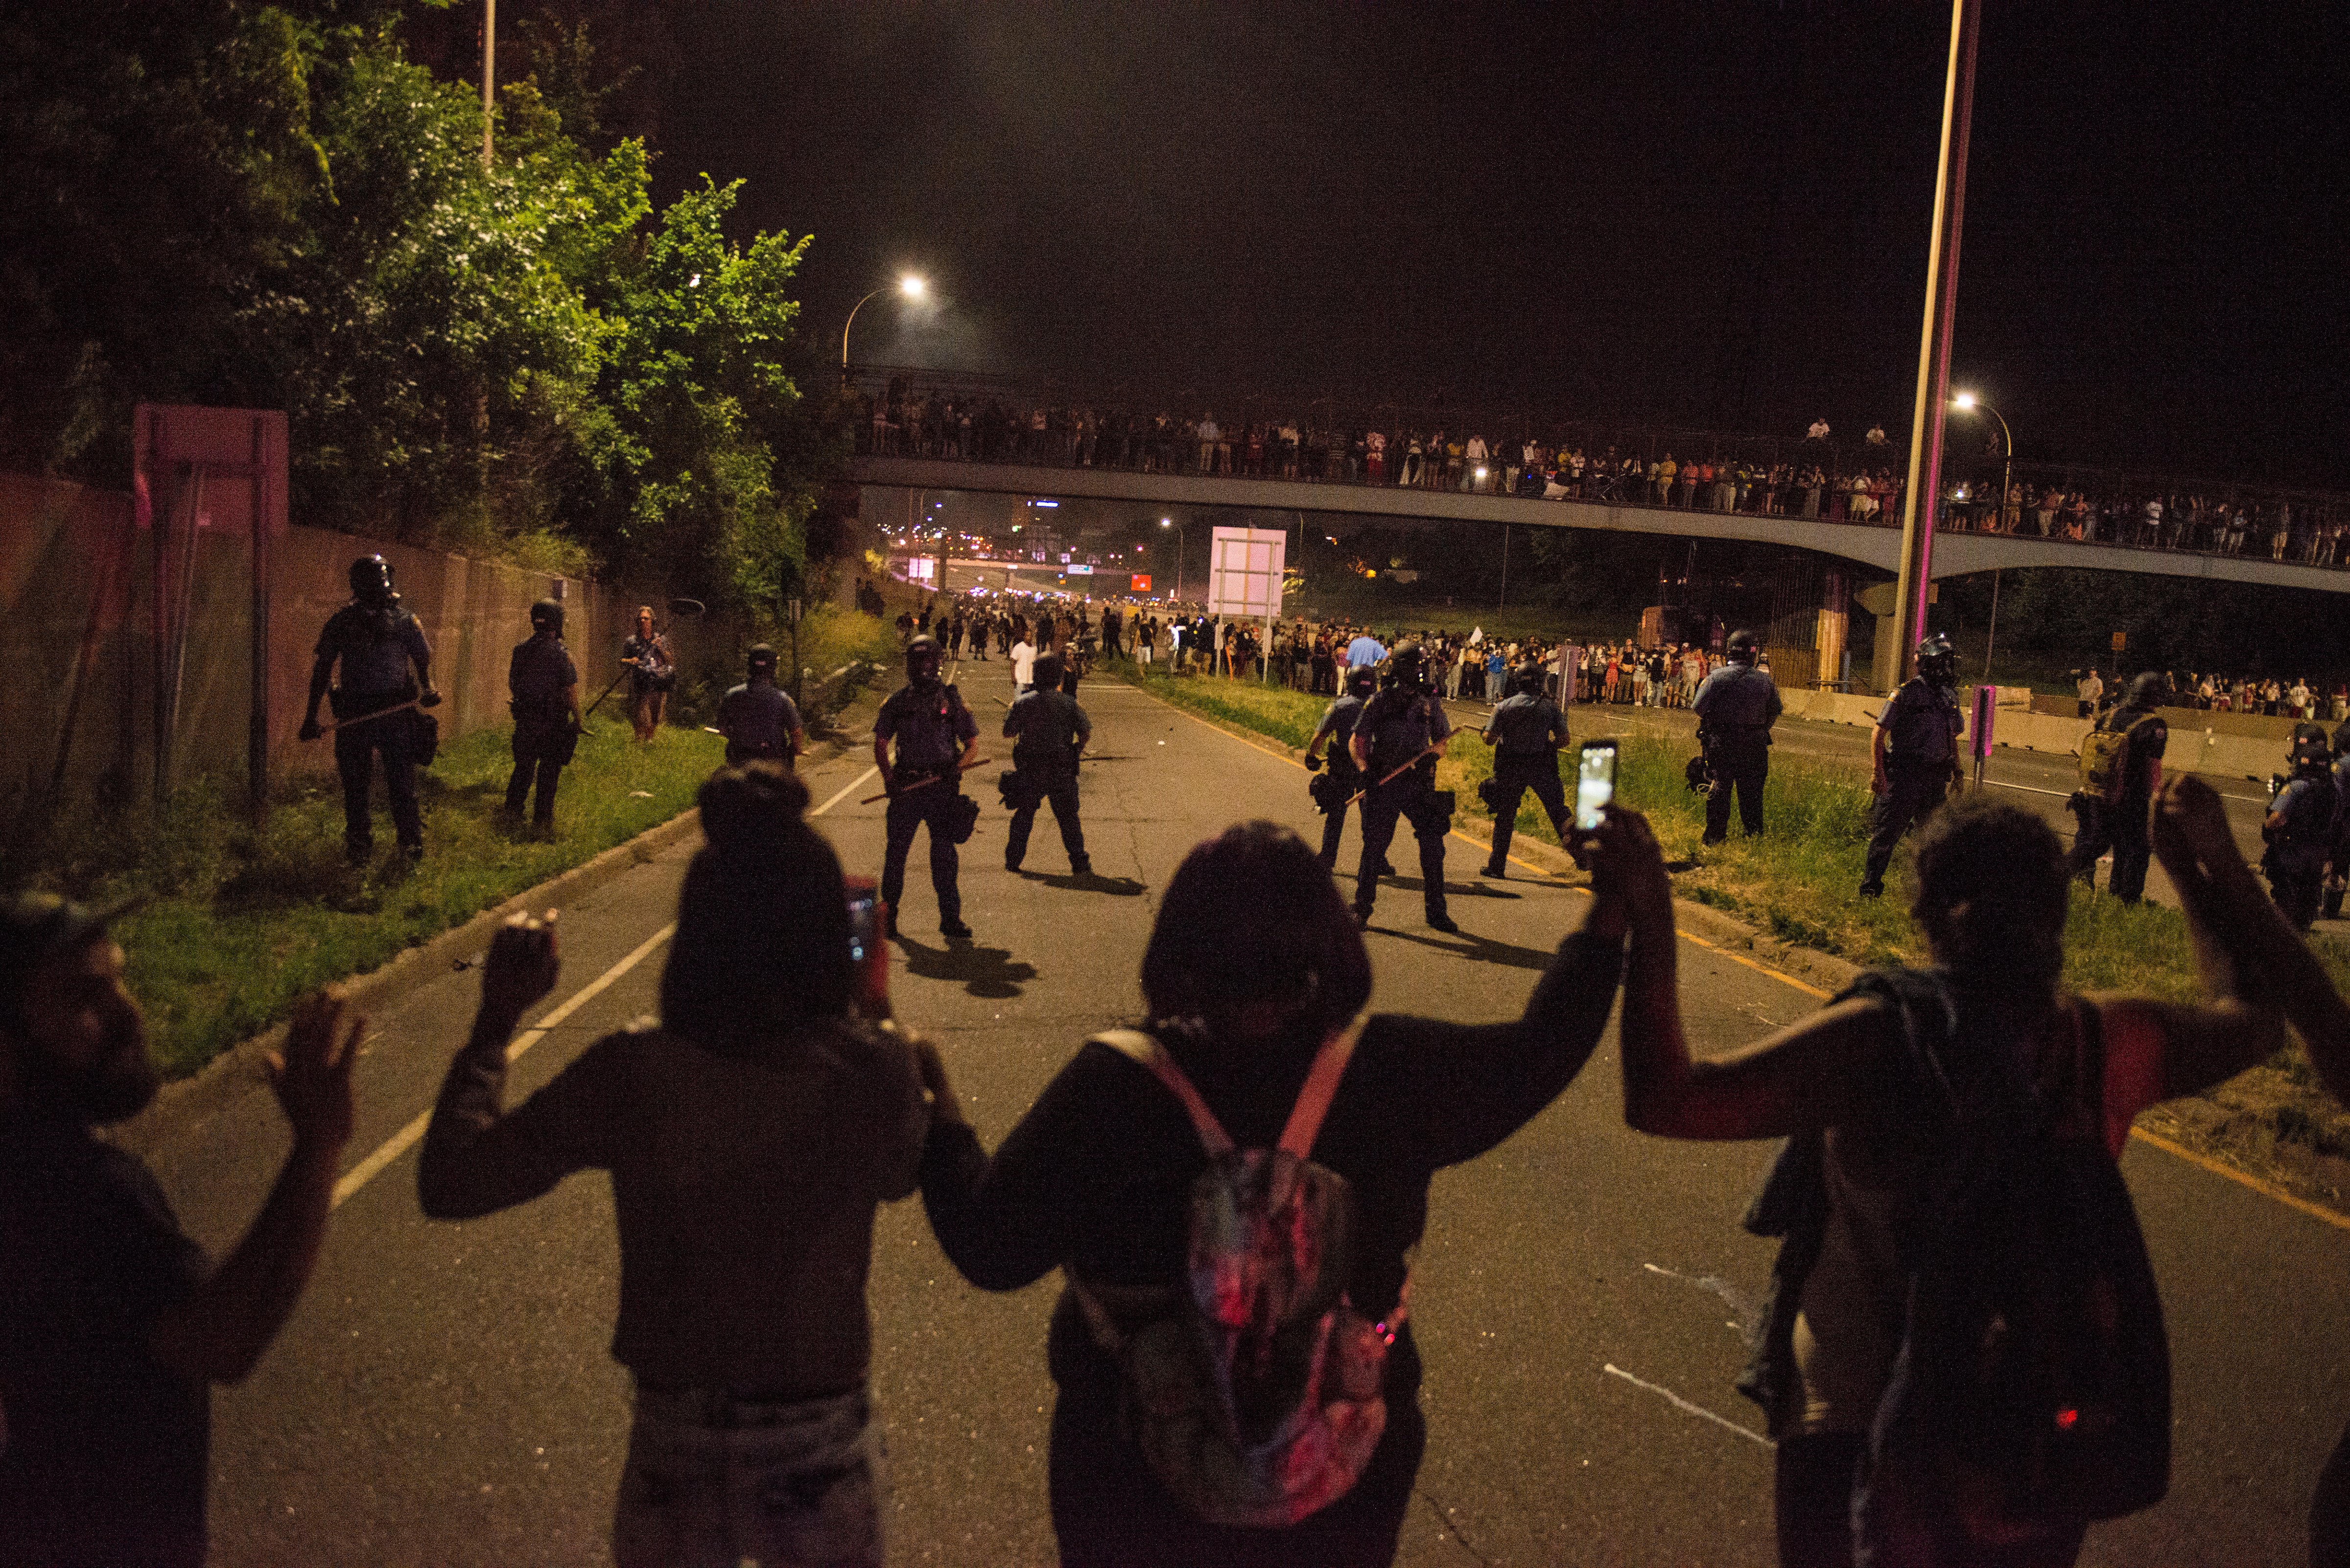 Protesters link hands on shut down highway I-94 on July 9, 2016 in St. Paul, Minnesota, in response to the police killing of Philando Castile on June 6, 2016 in Falcon Heights, Minnesota. (Stephen Maturen—Getty Images)